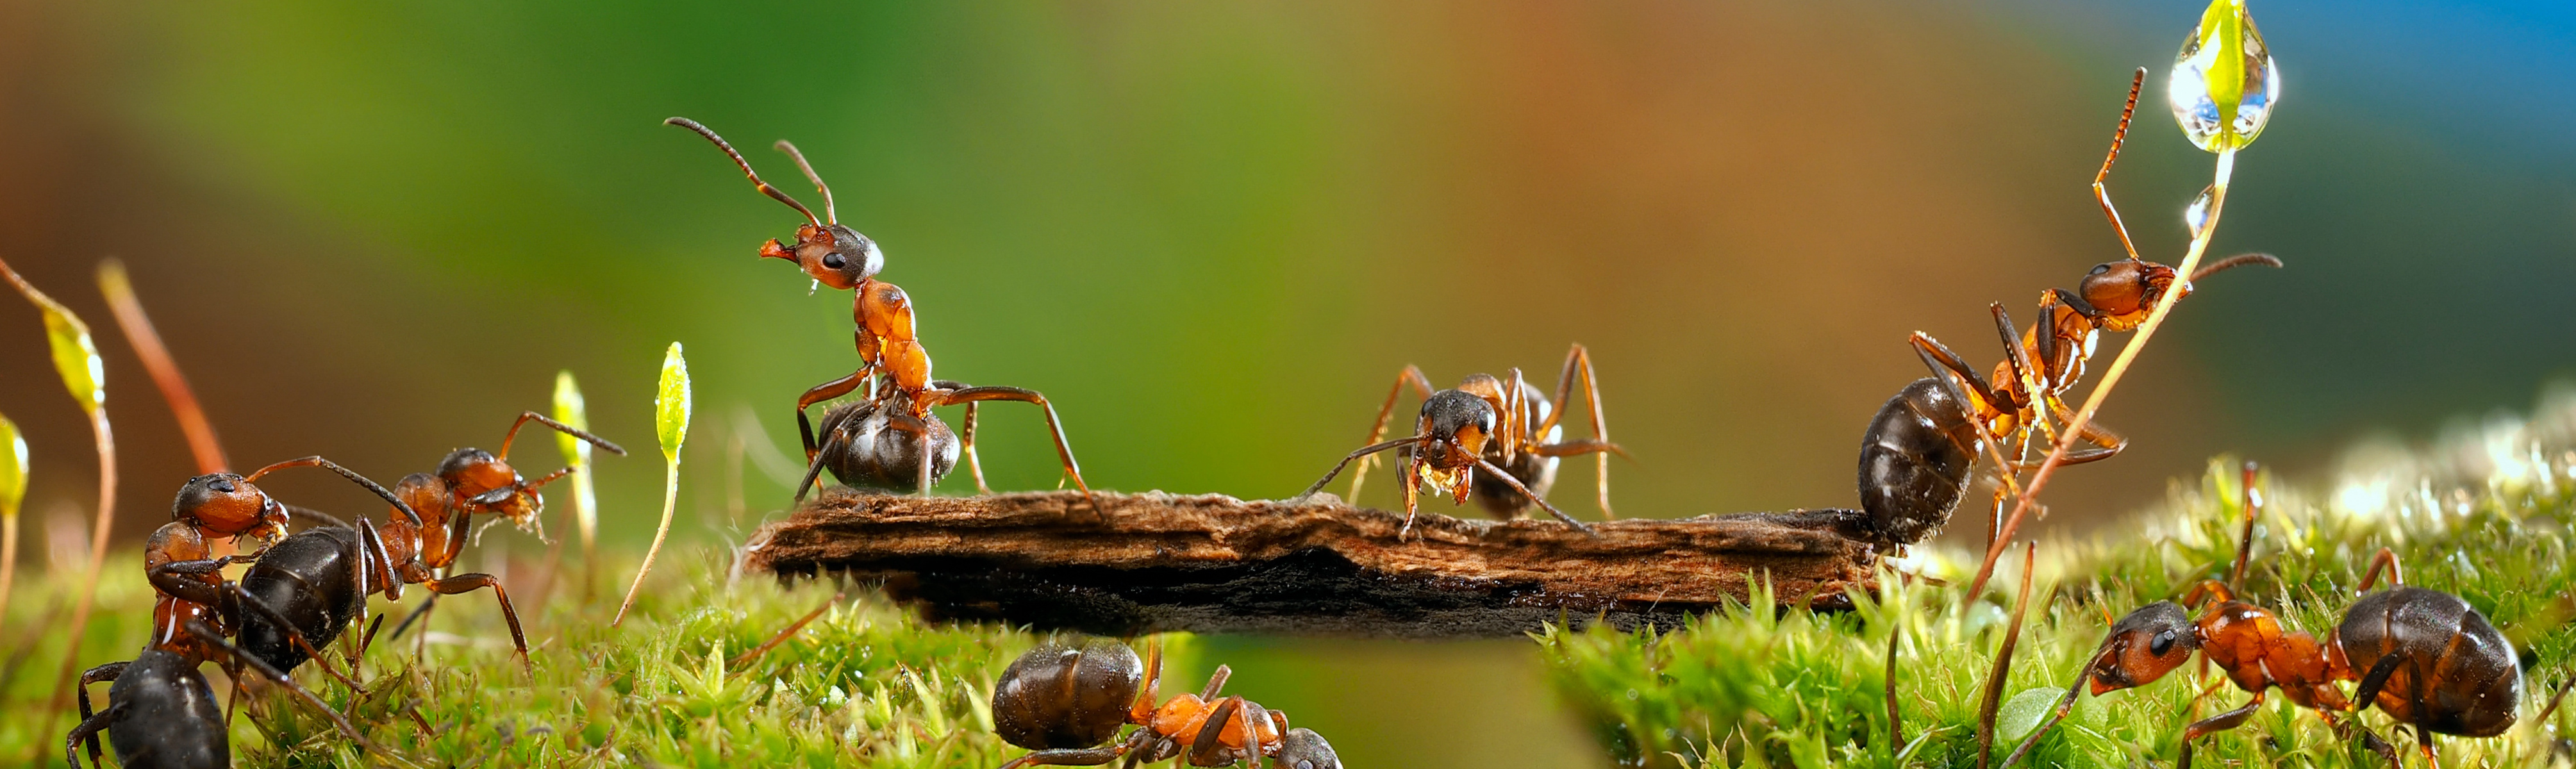 Working Together to Grow the Pest Management Industry